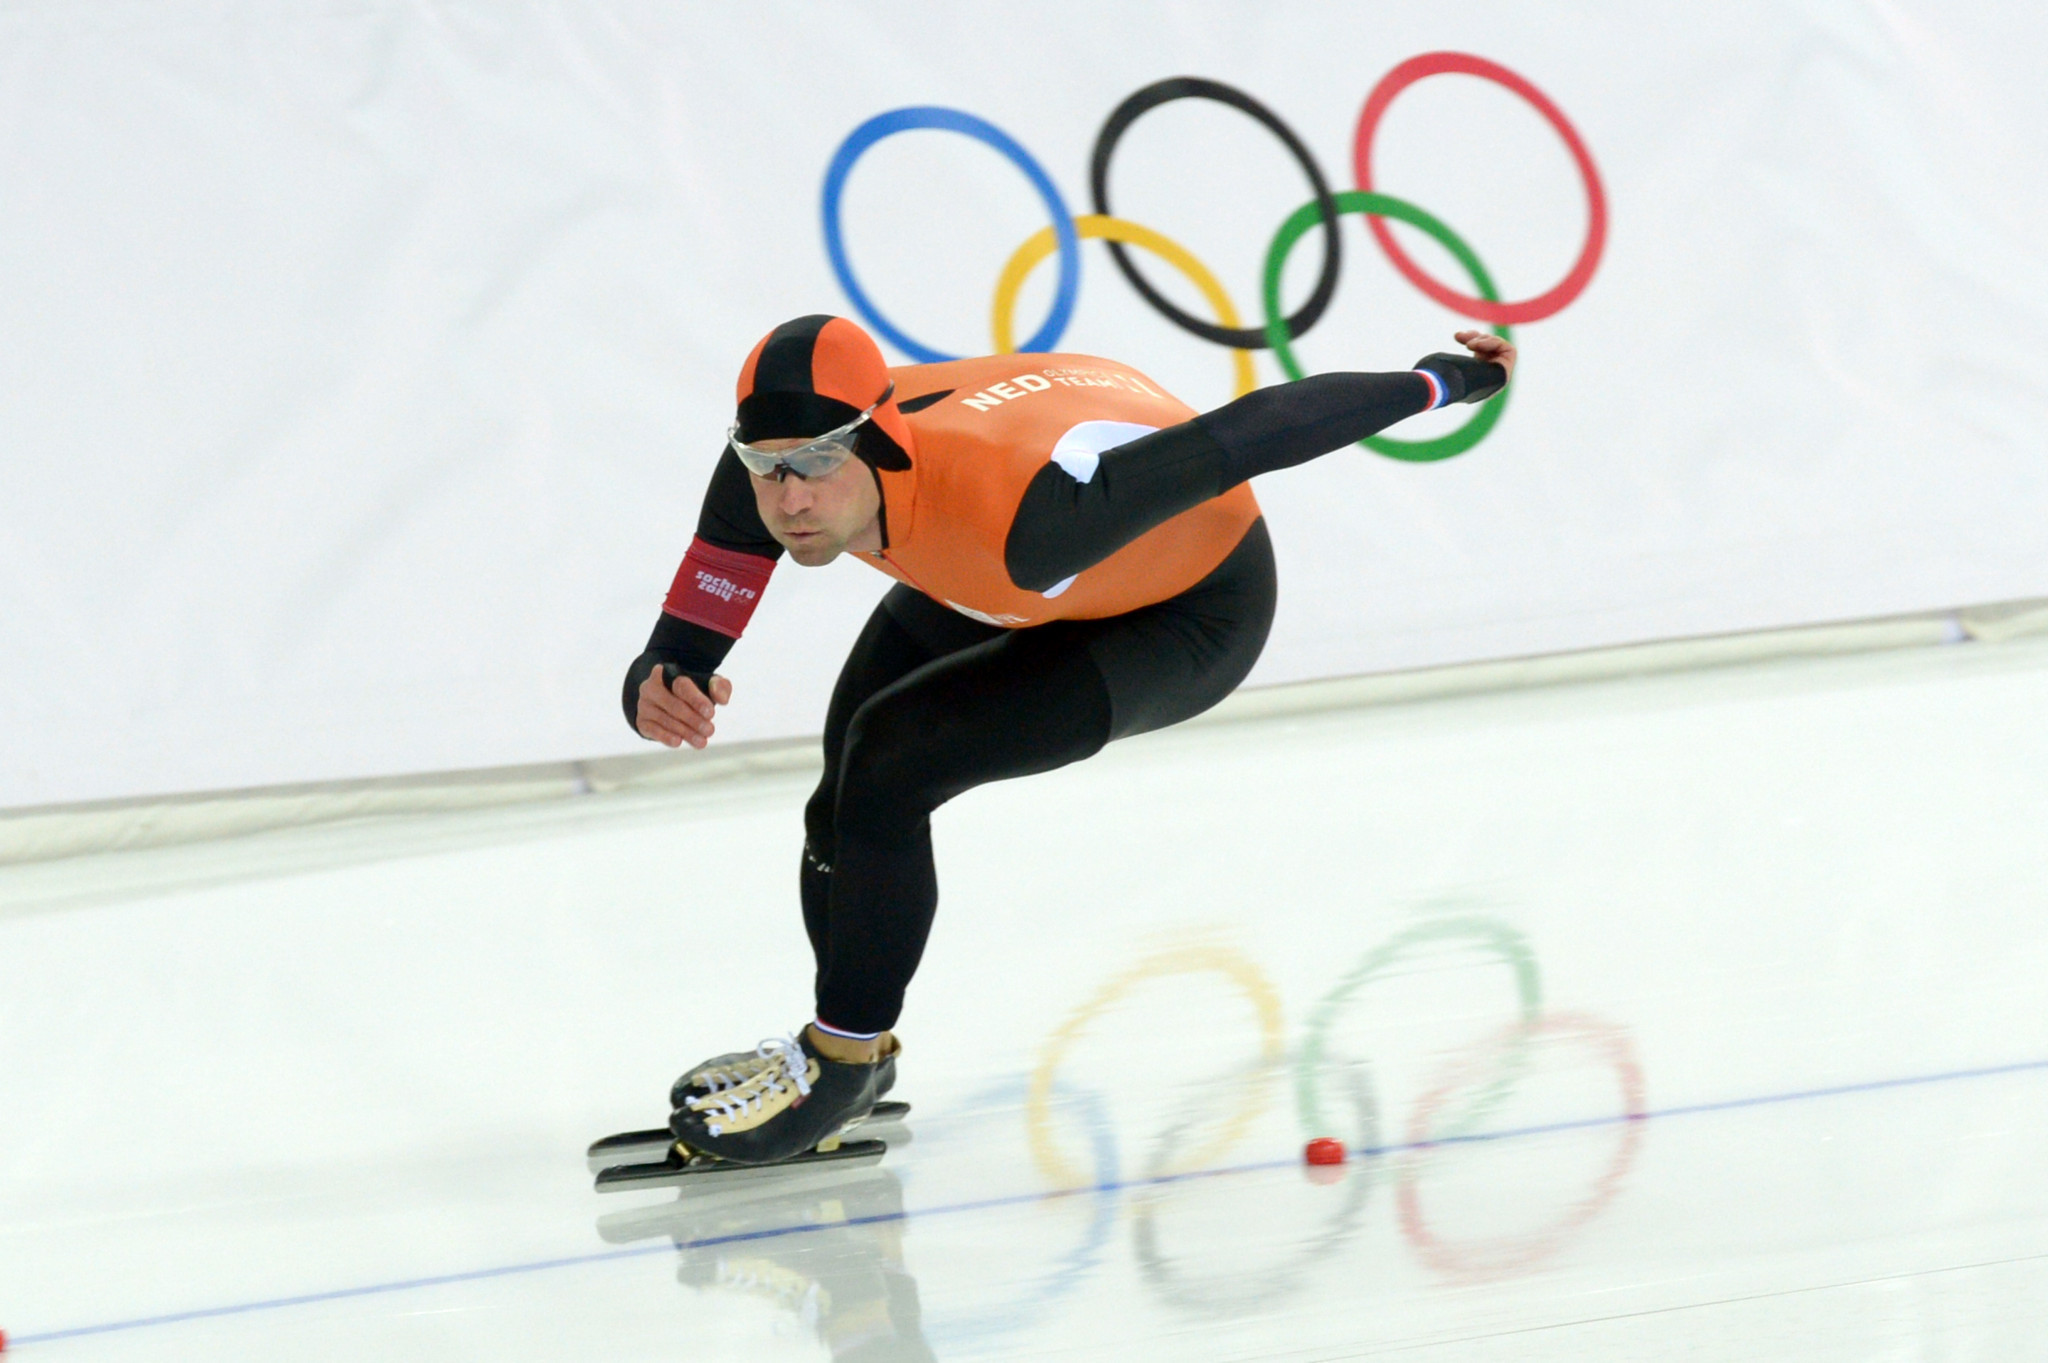 Mark Tuitert, one of the Dutch speed skaters involved in the legal case, pictured racing at Sochi 2014 ©Getty Images